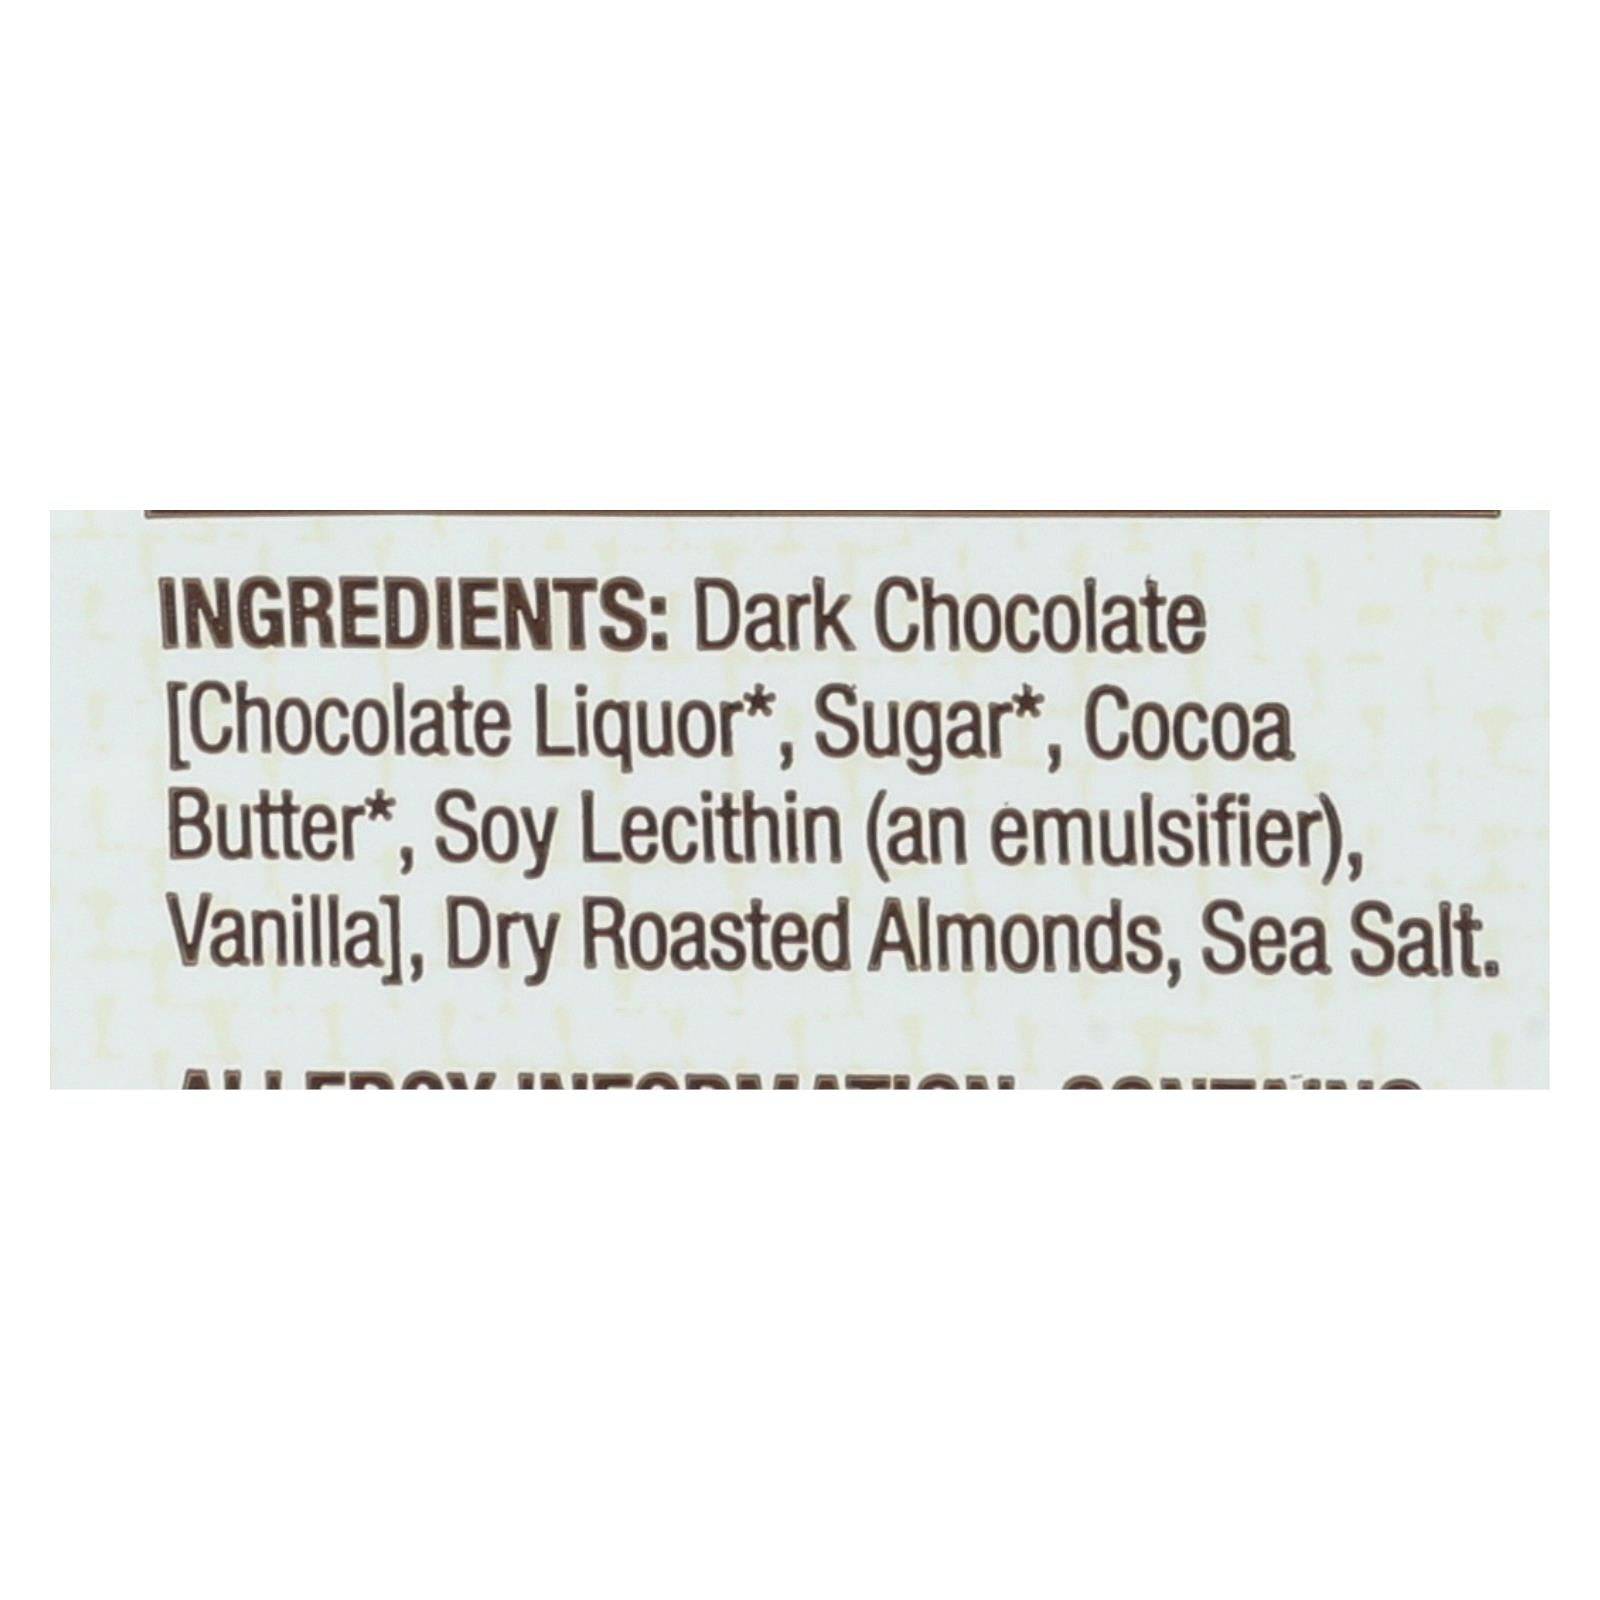 Buy Bark Thins Bark Thins Dark Chocolate - Almond With Sea Salt - Case Of 12 - 4.7 Oz.  at OnlyNaturals.us